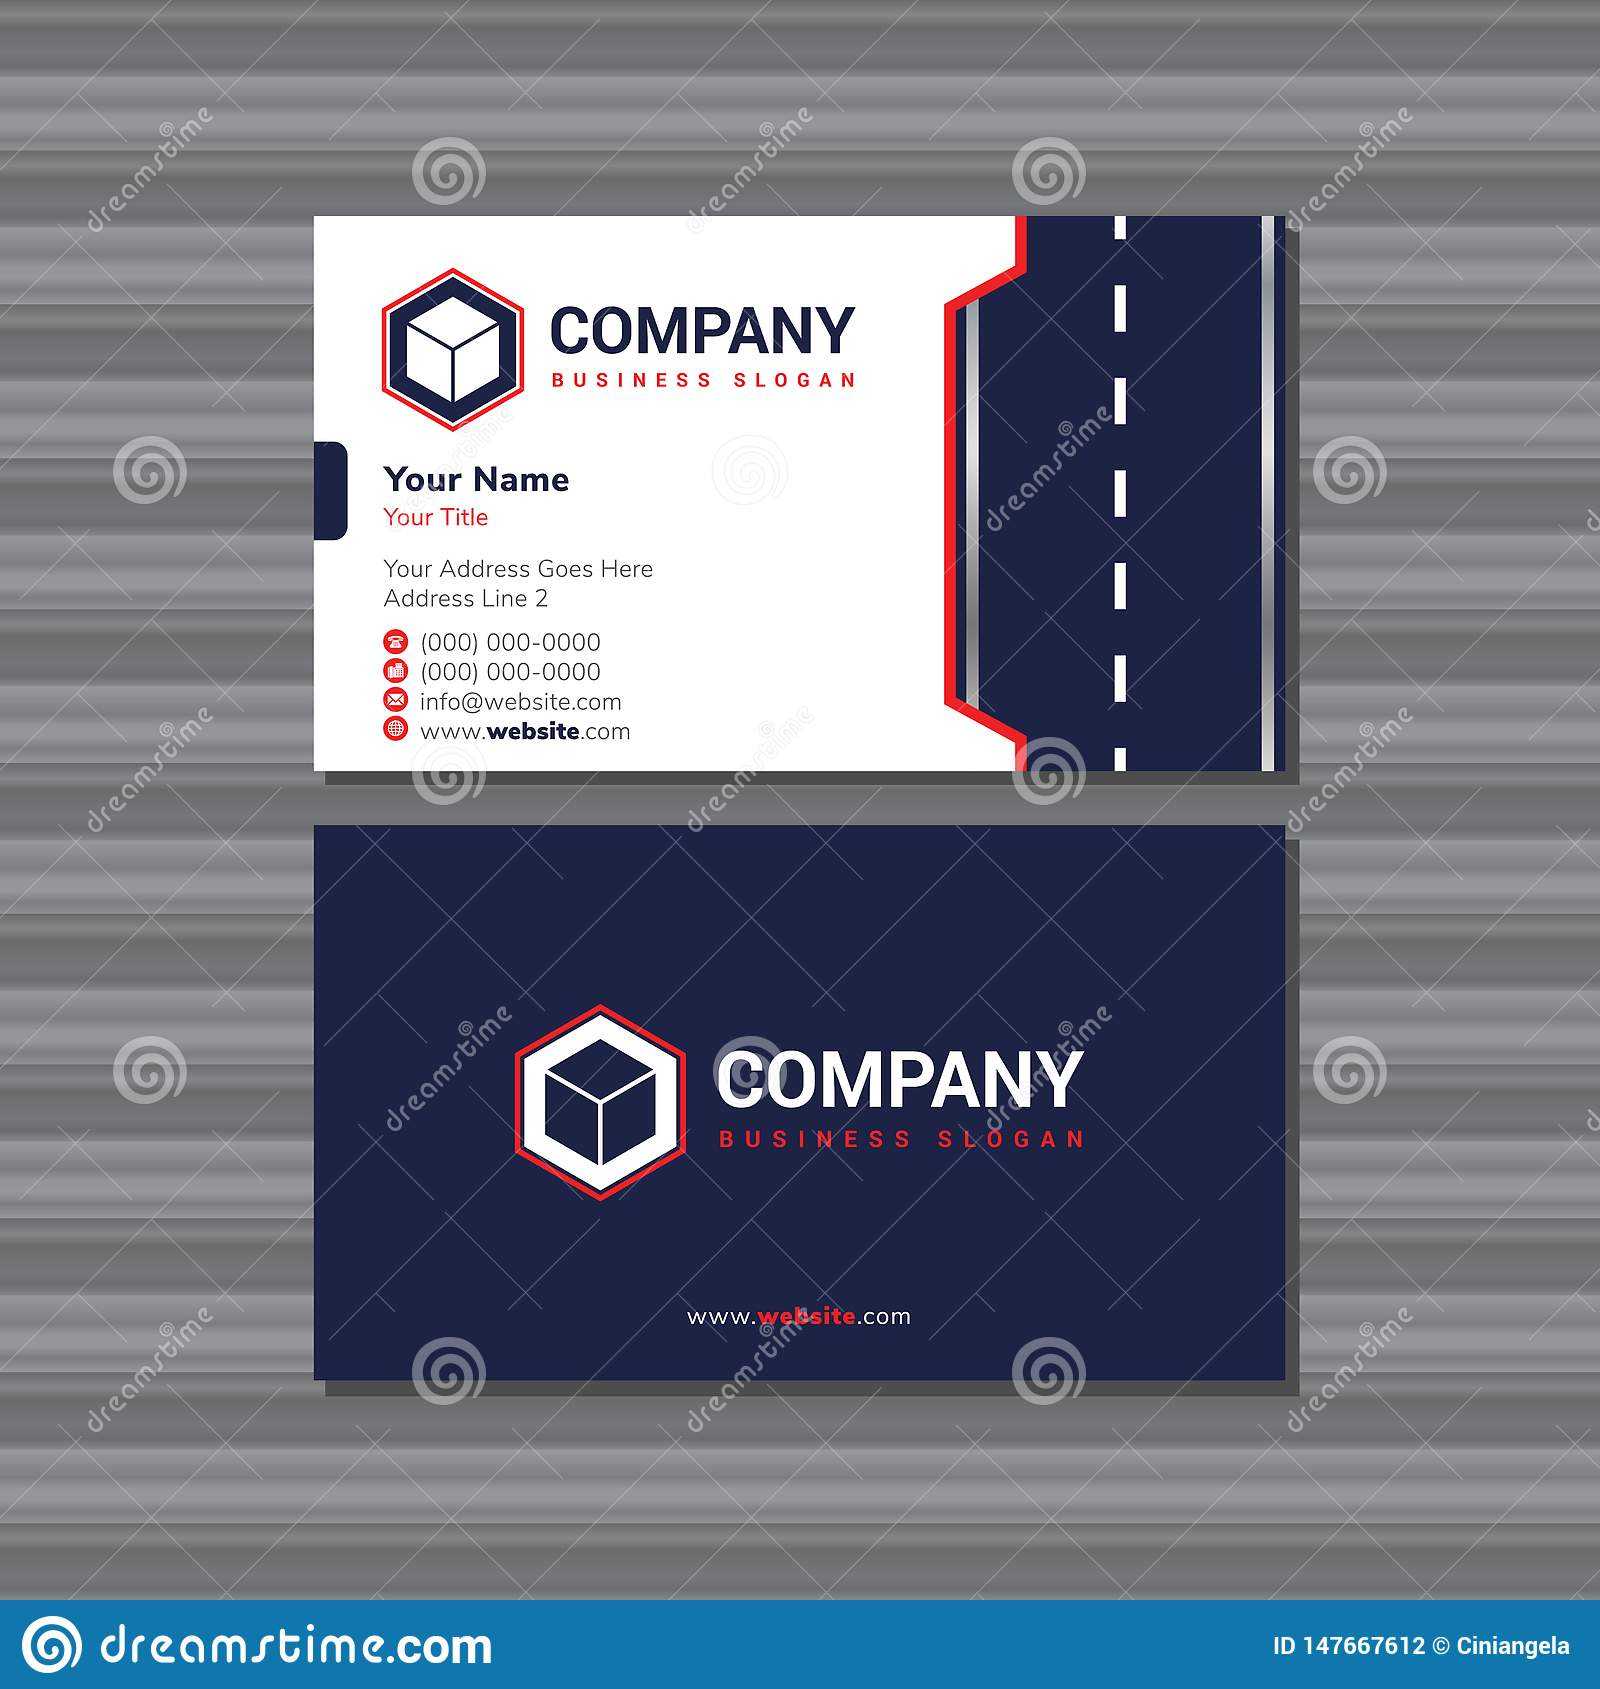 Road Business Card Design For Car, Taxi, Transportation Throughout Transport Business Cards Templates Free